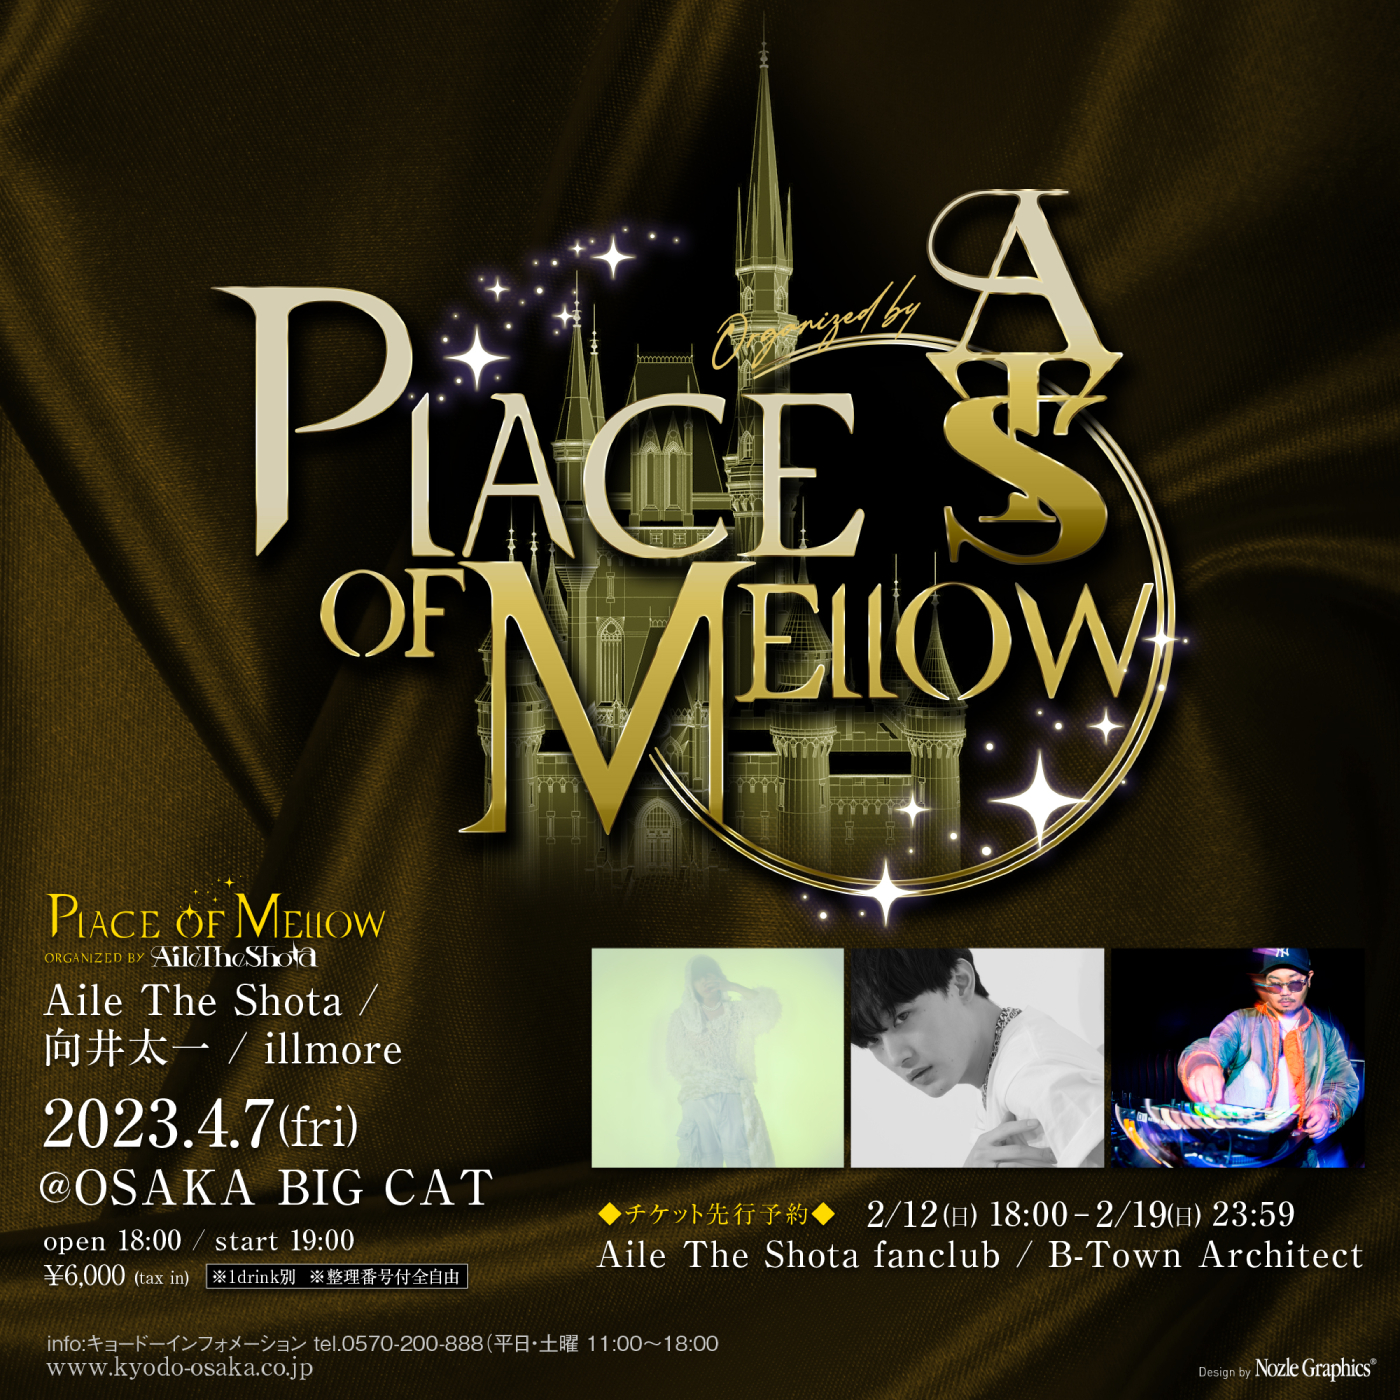 Aile The Shota、『Place of Mellow』関西公演開催決定！ 向井太一＆illmoreがゲスト出演 - 画像一覧（1/1）